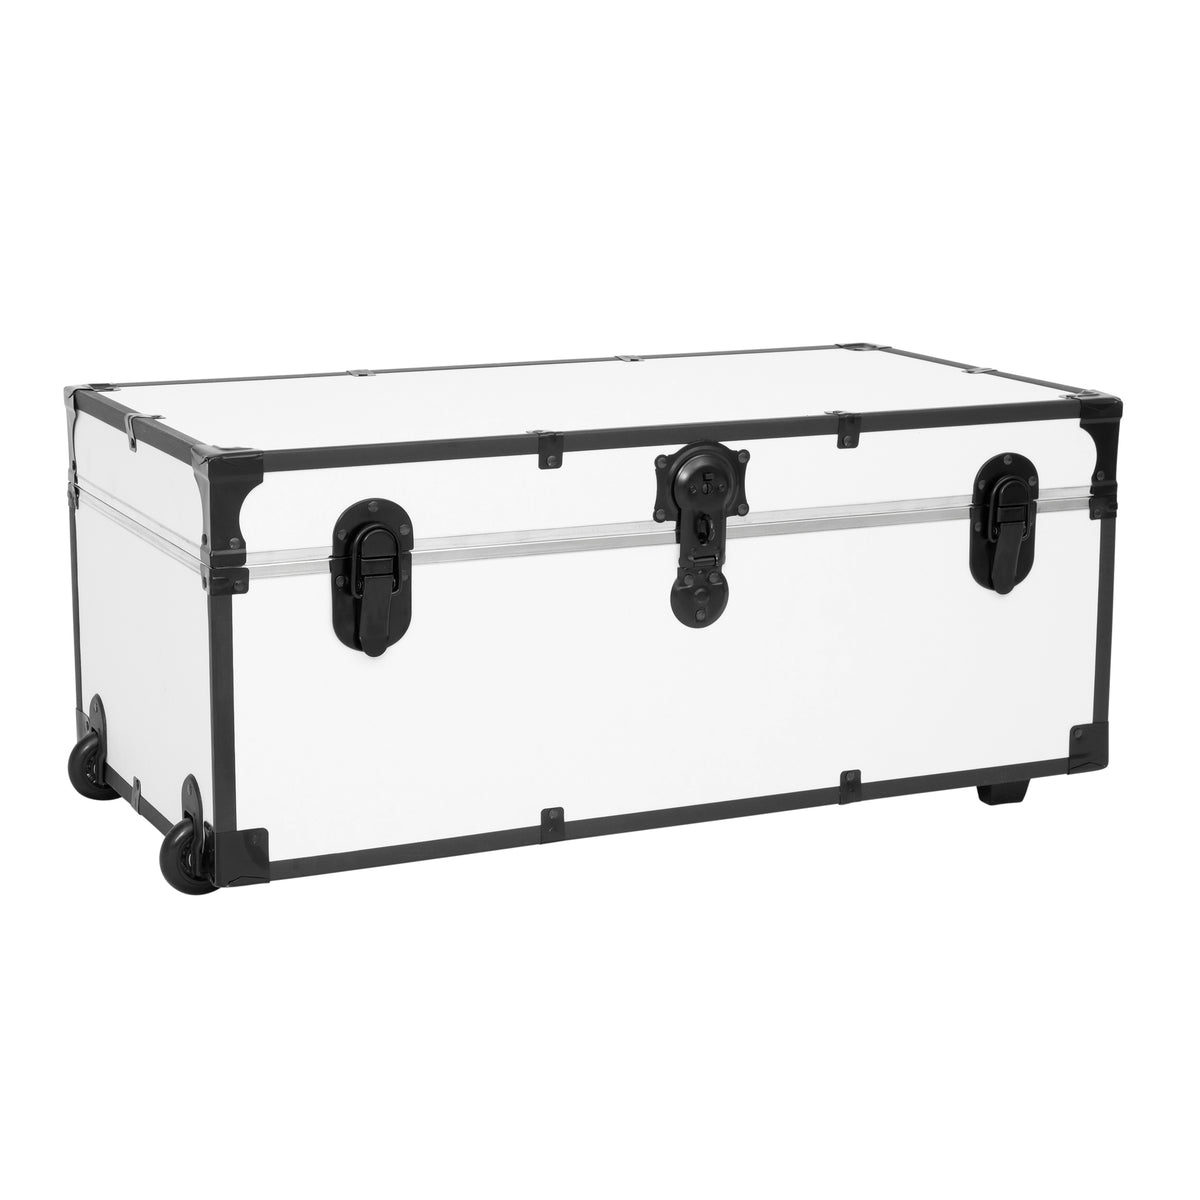 Seward Rover 30" Trunk with Wheels & One Carry Handle, White